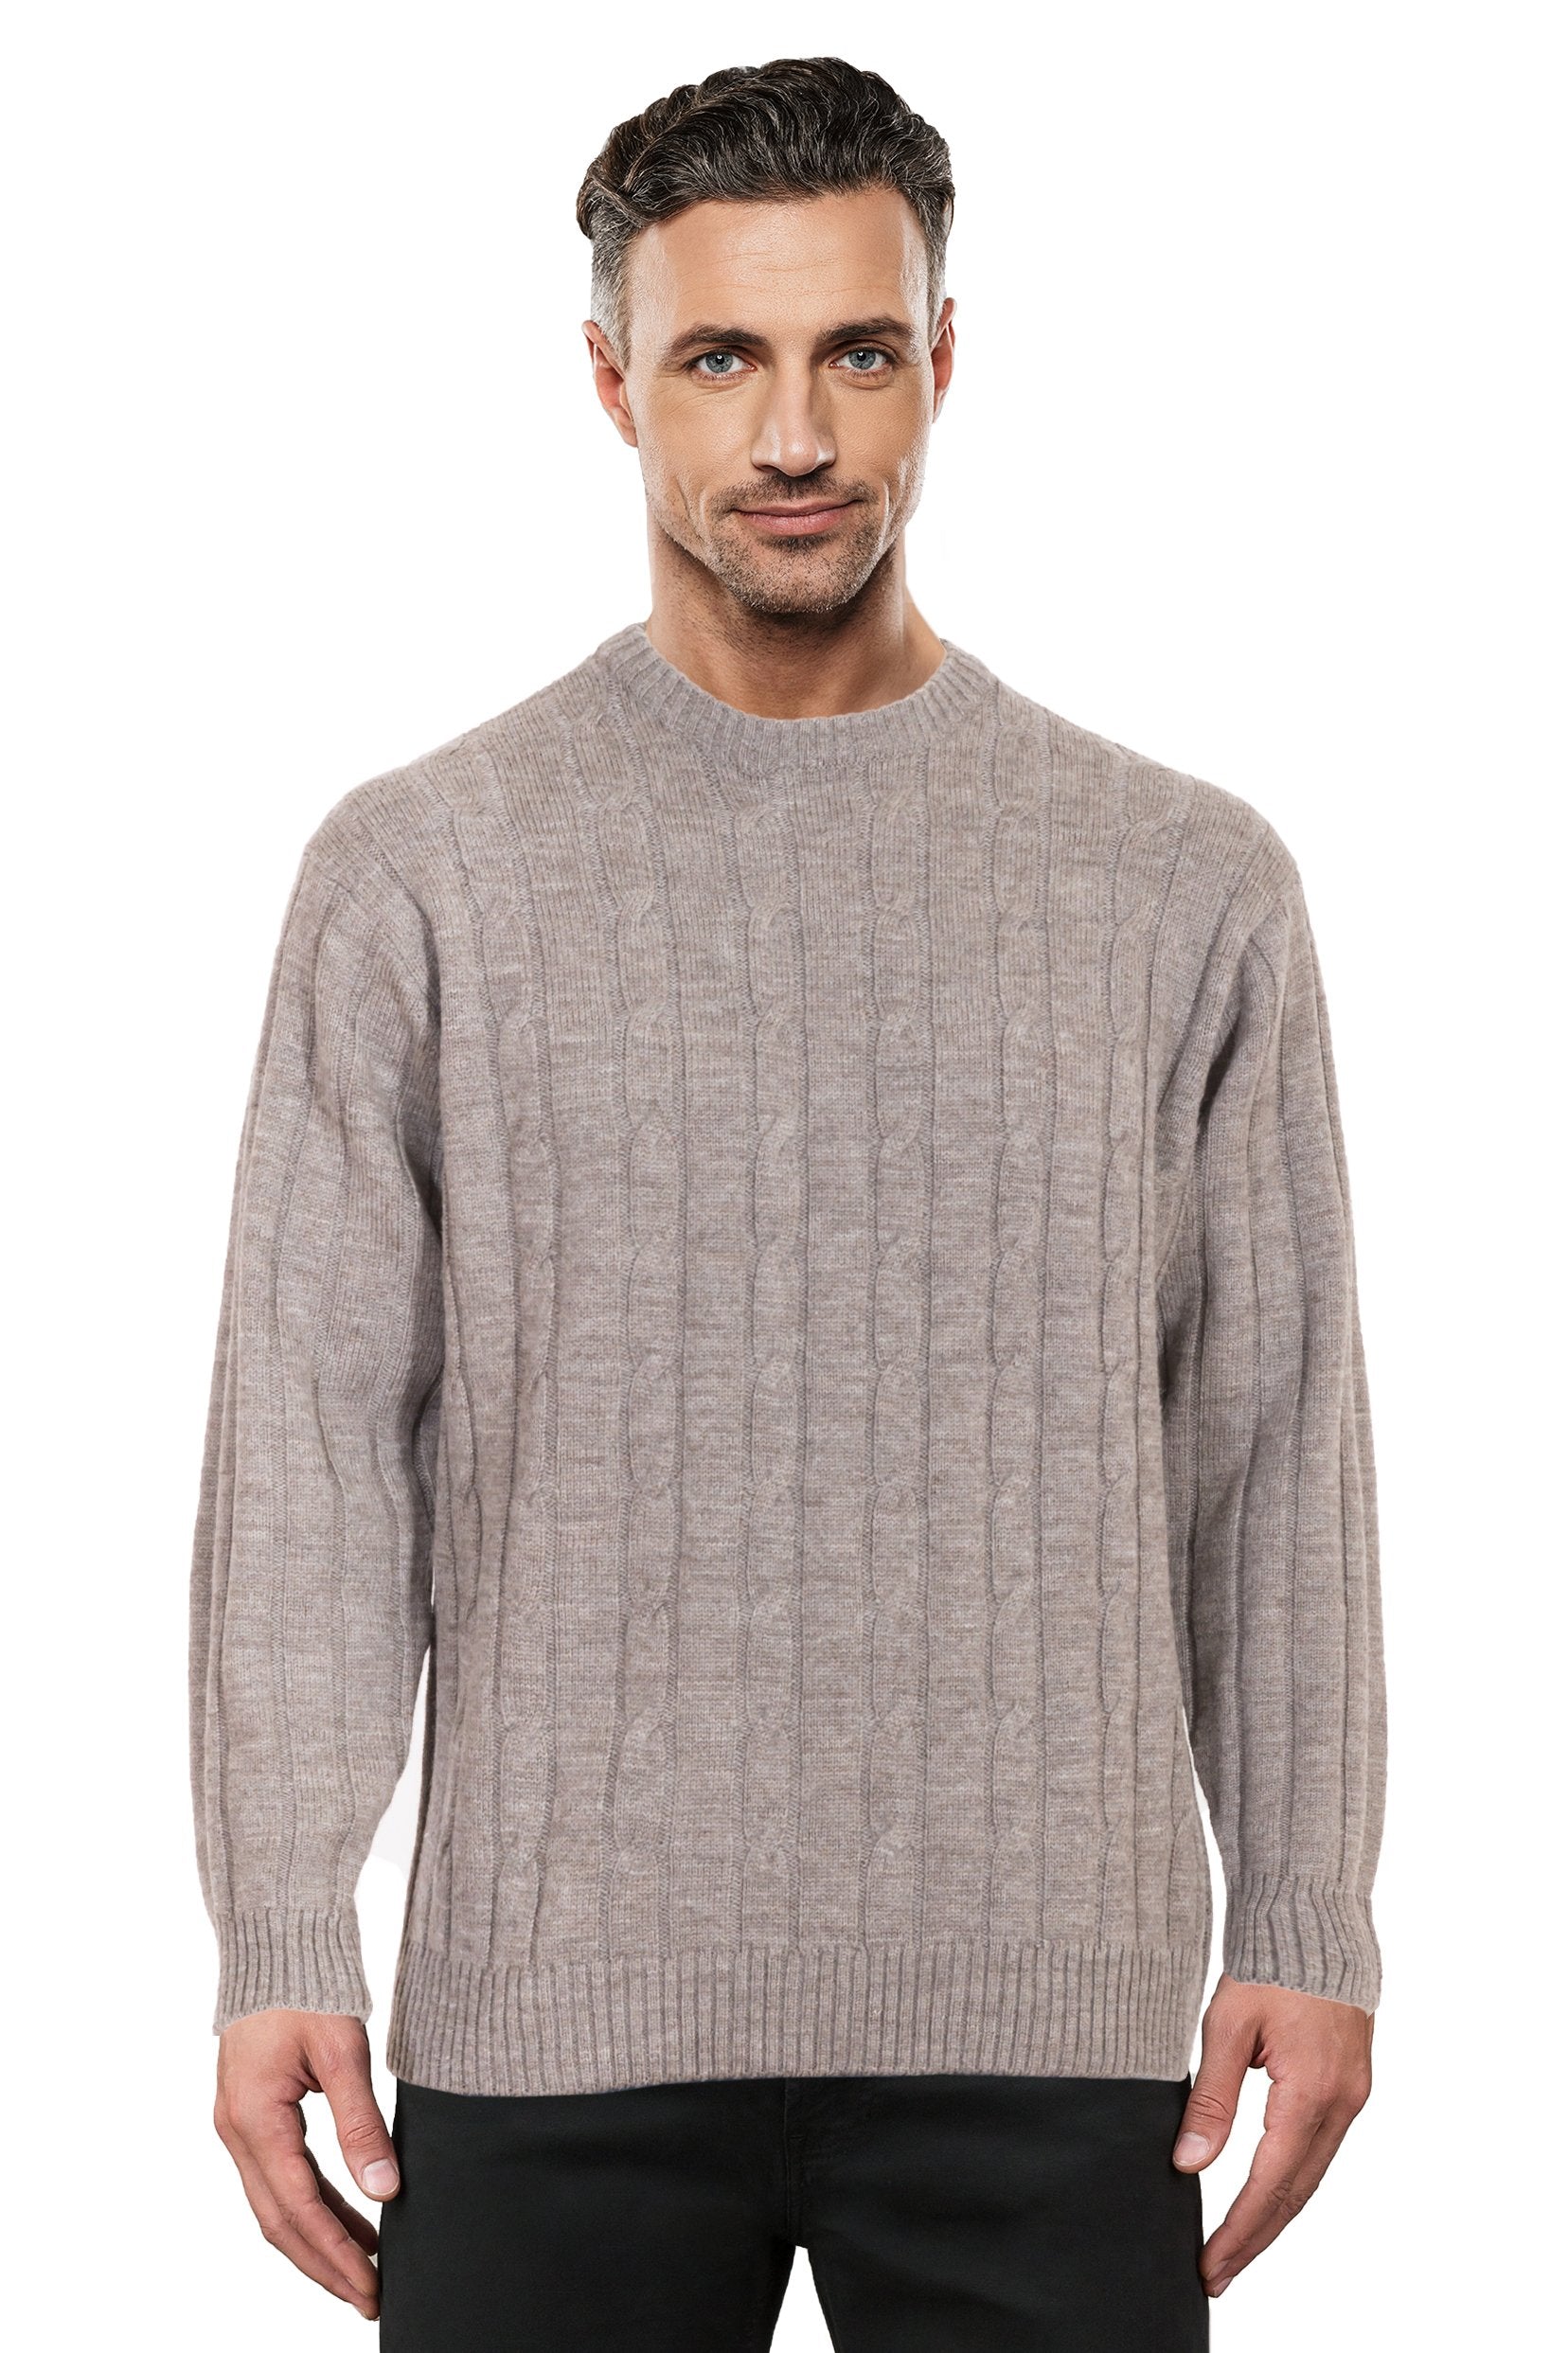 Sable Cable Crew Neck Jumper for Sale - Sweaters Australia